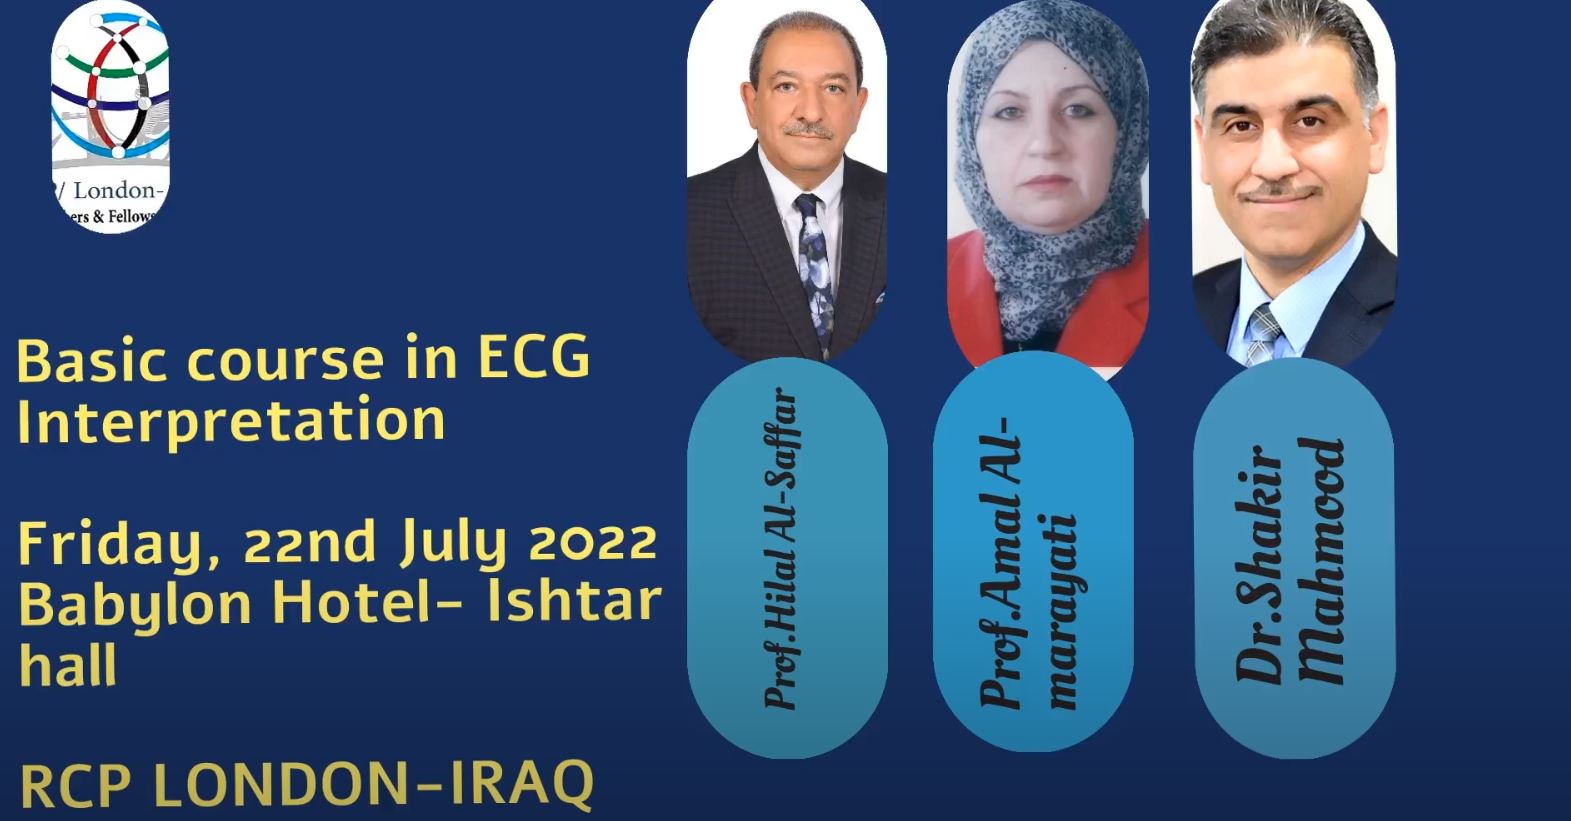 Basic ECG course by the RCP LONDON – IRAQ